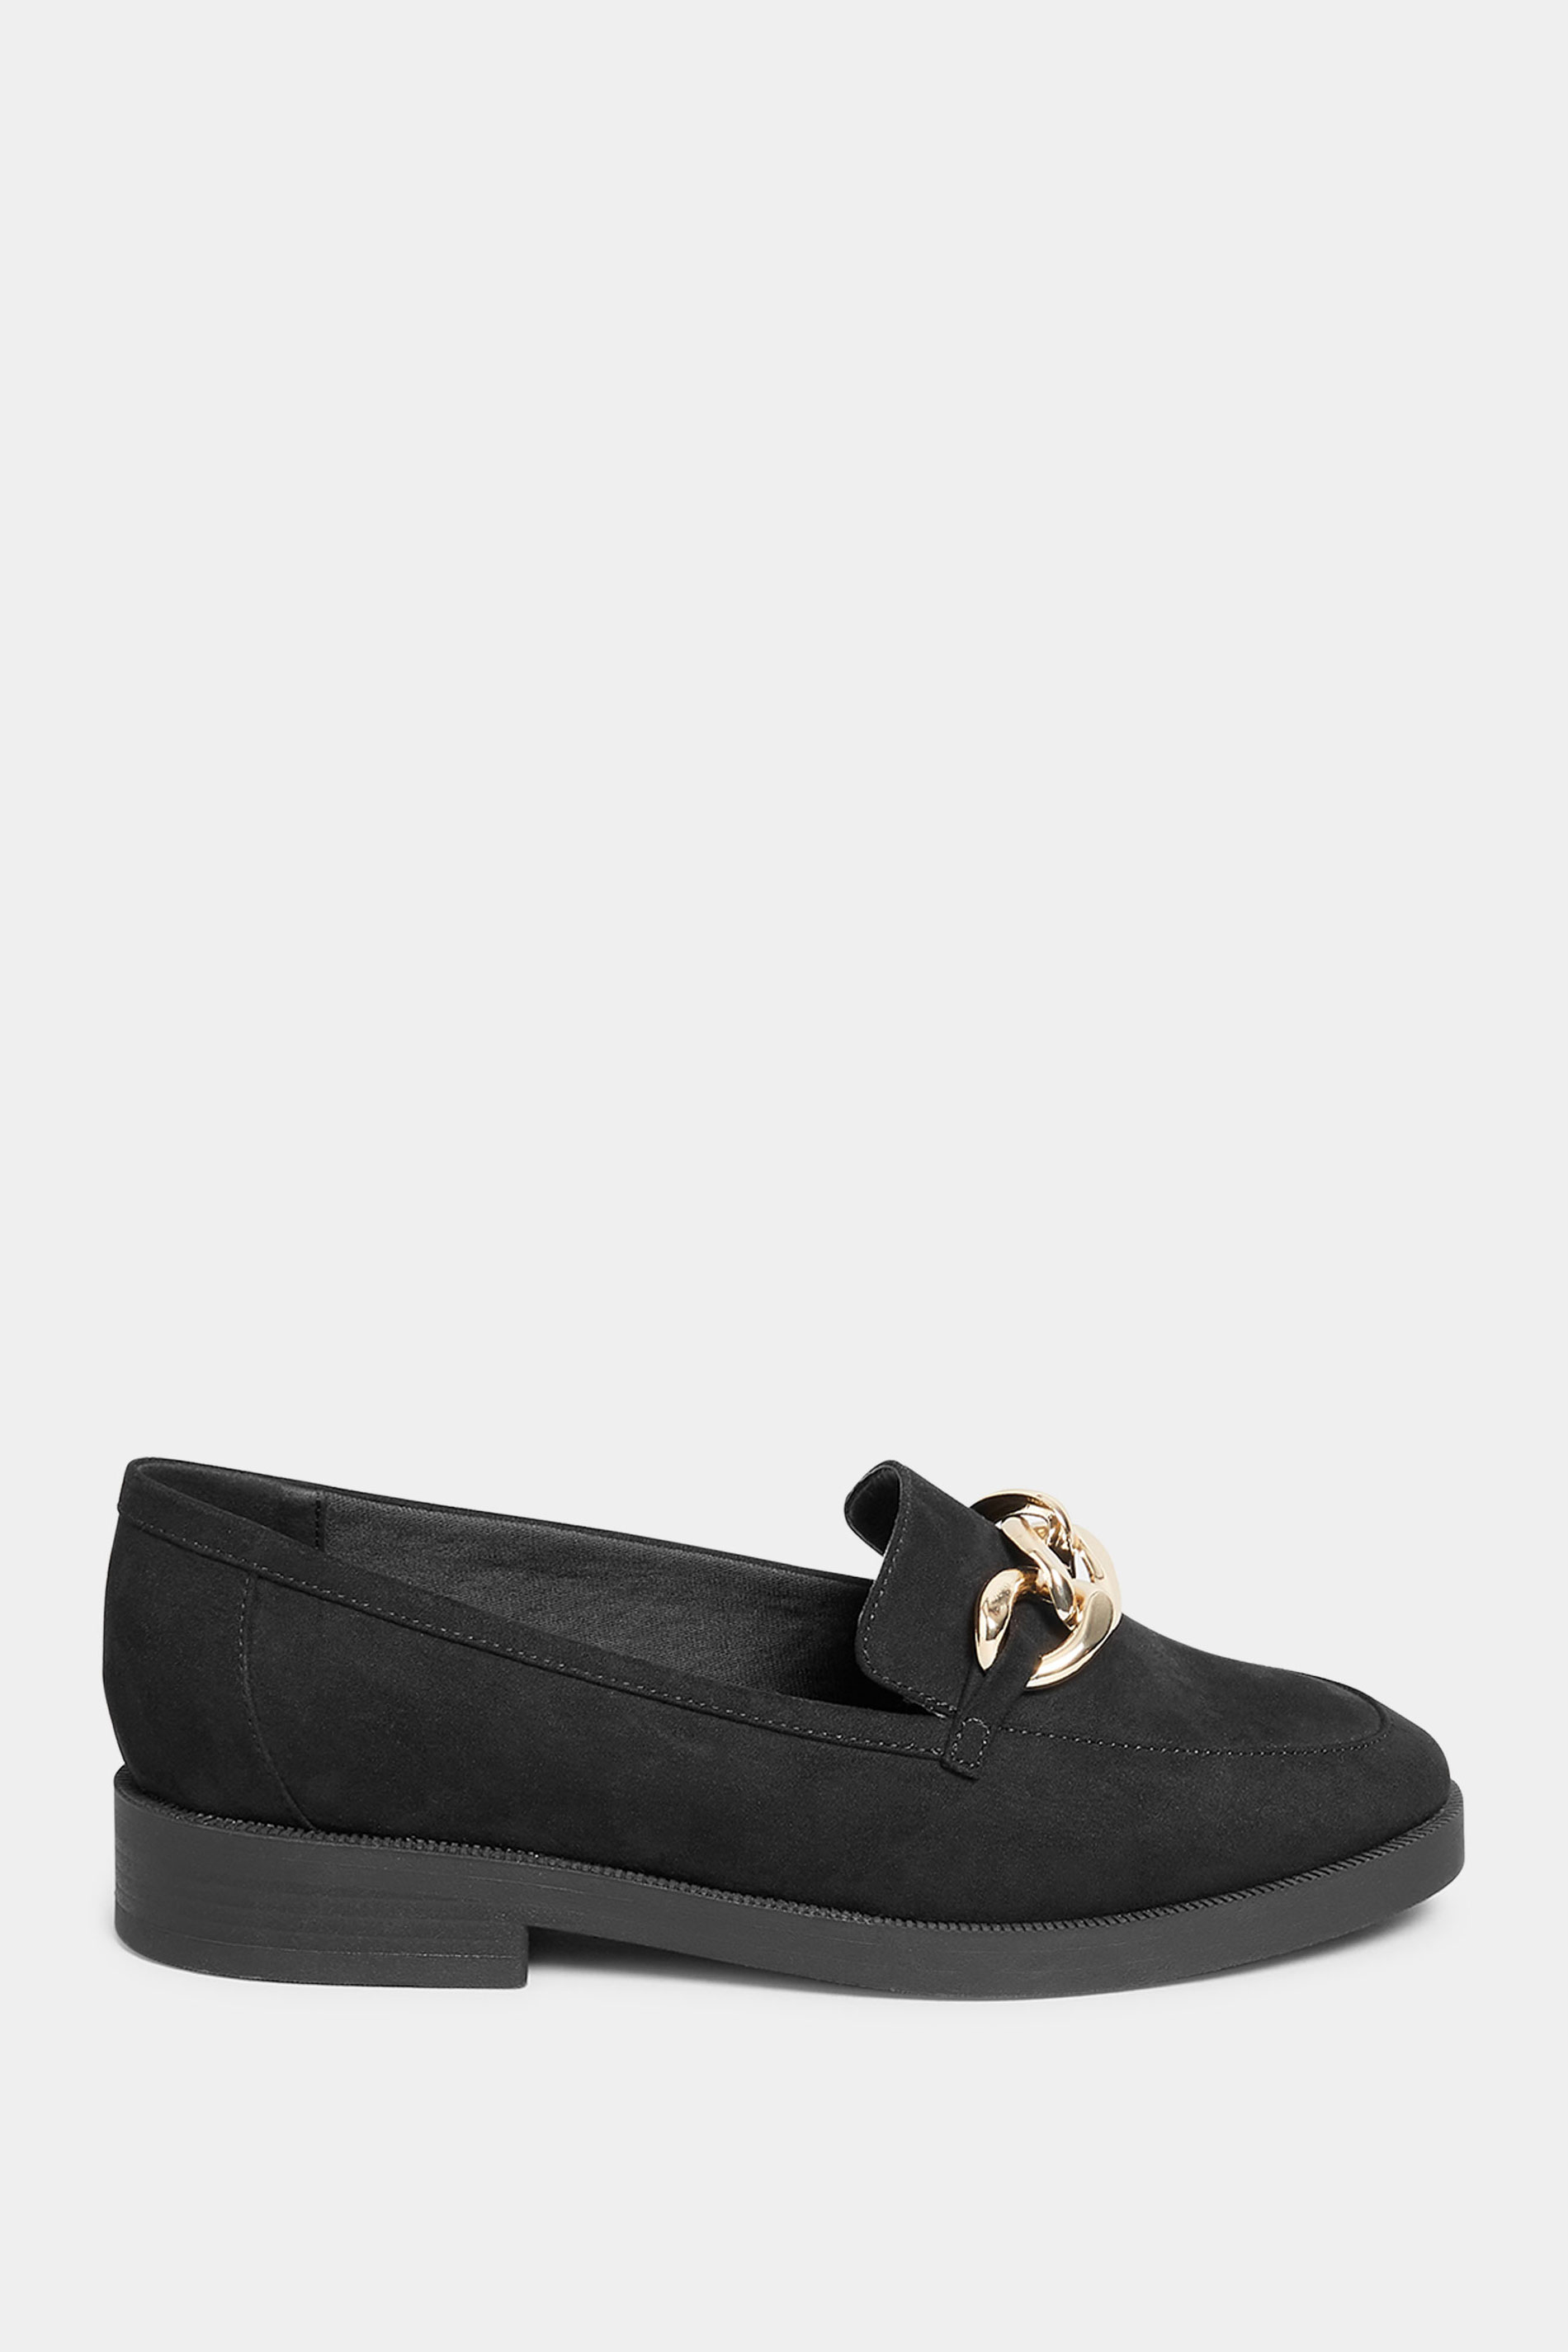 LTS Black Gold Chain Loafer In Standard Fit | Long Tall Sally 3